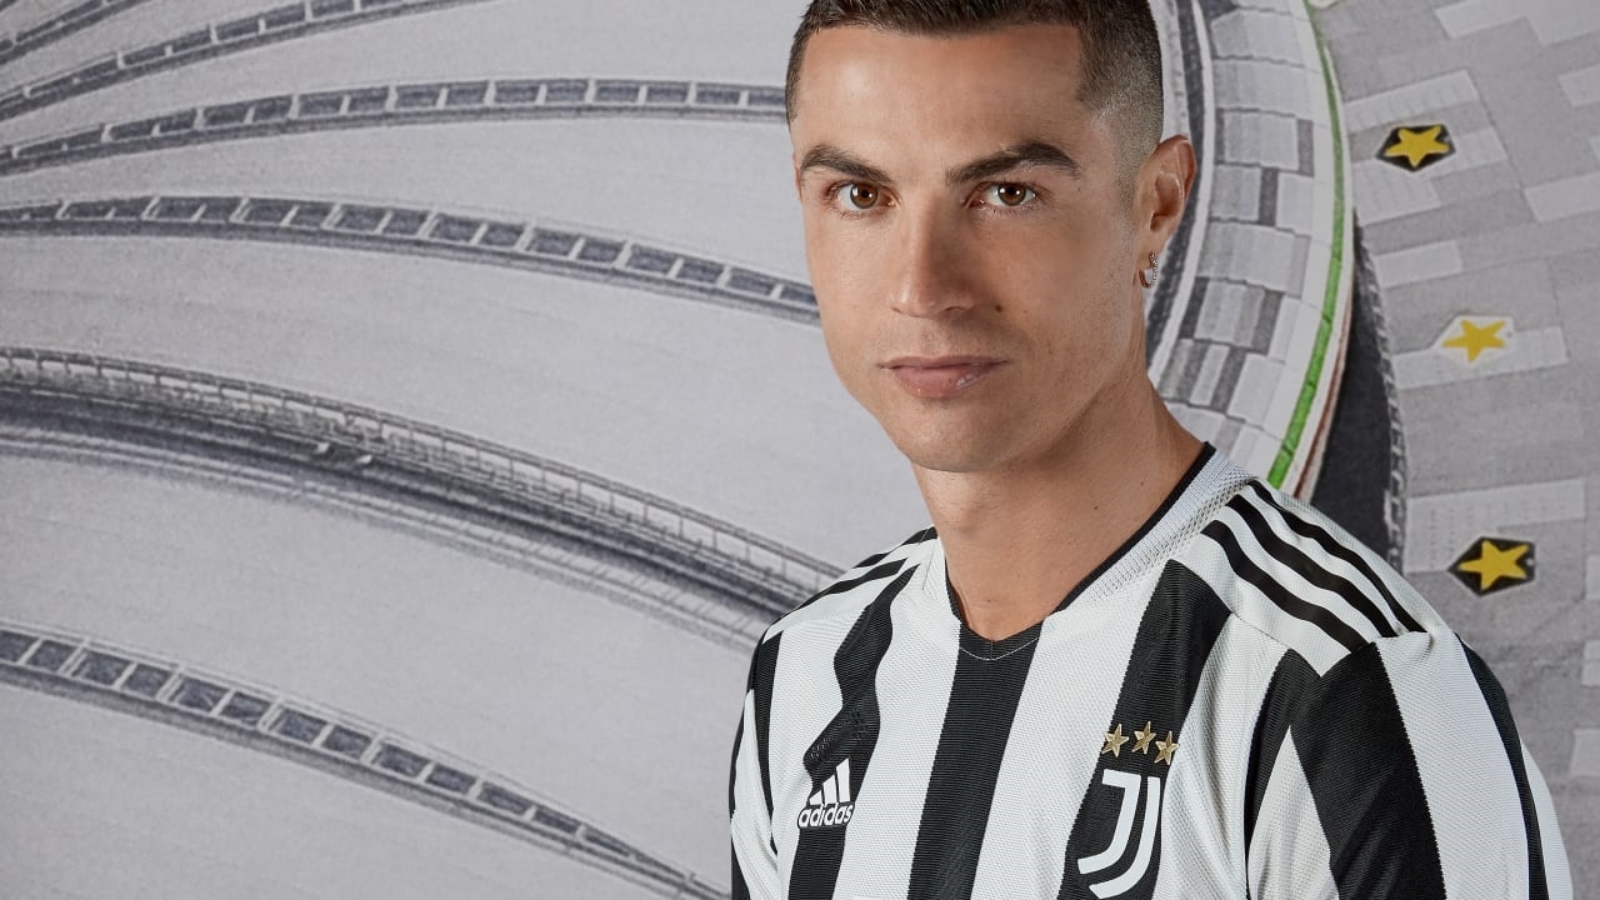 Juventus 2021-22 kit: New home and away jersey styles & release dates